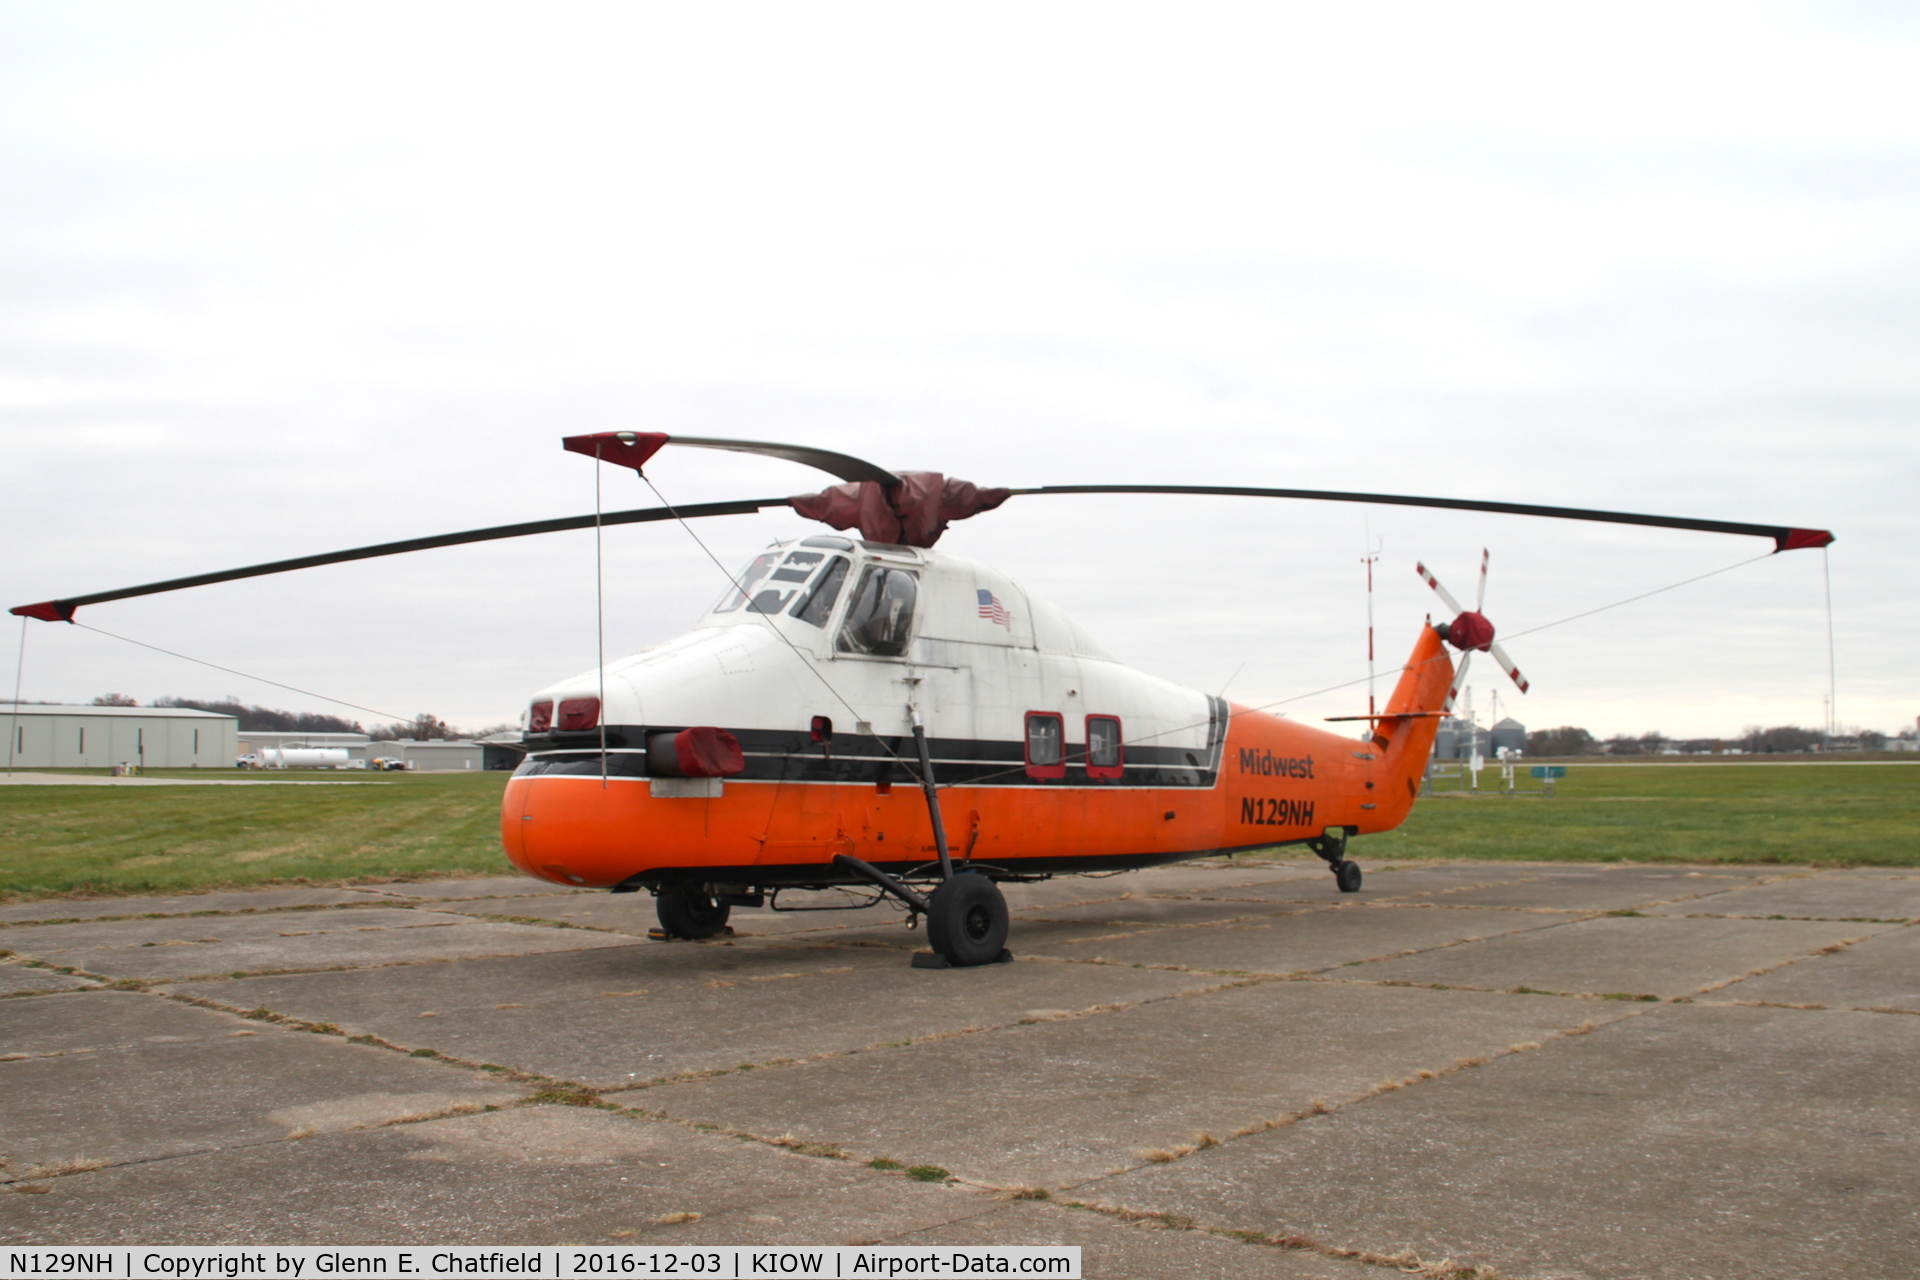 N129NH, 1975 Sikorsky S-58JT C/N 58-855, Spied on the ramp and it needed to be photographed